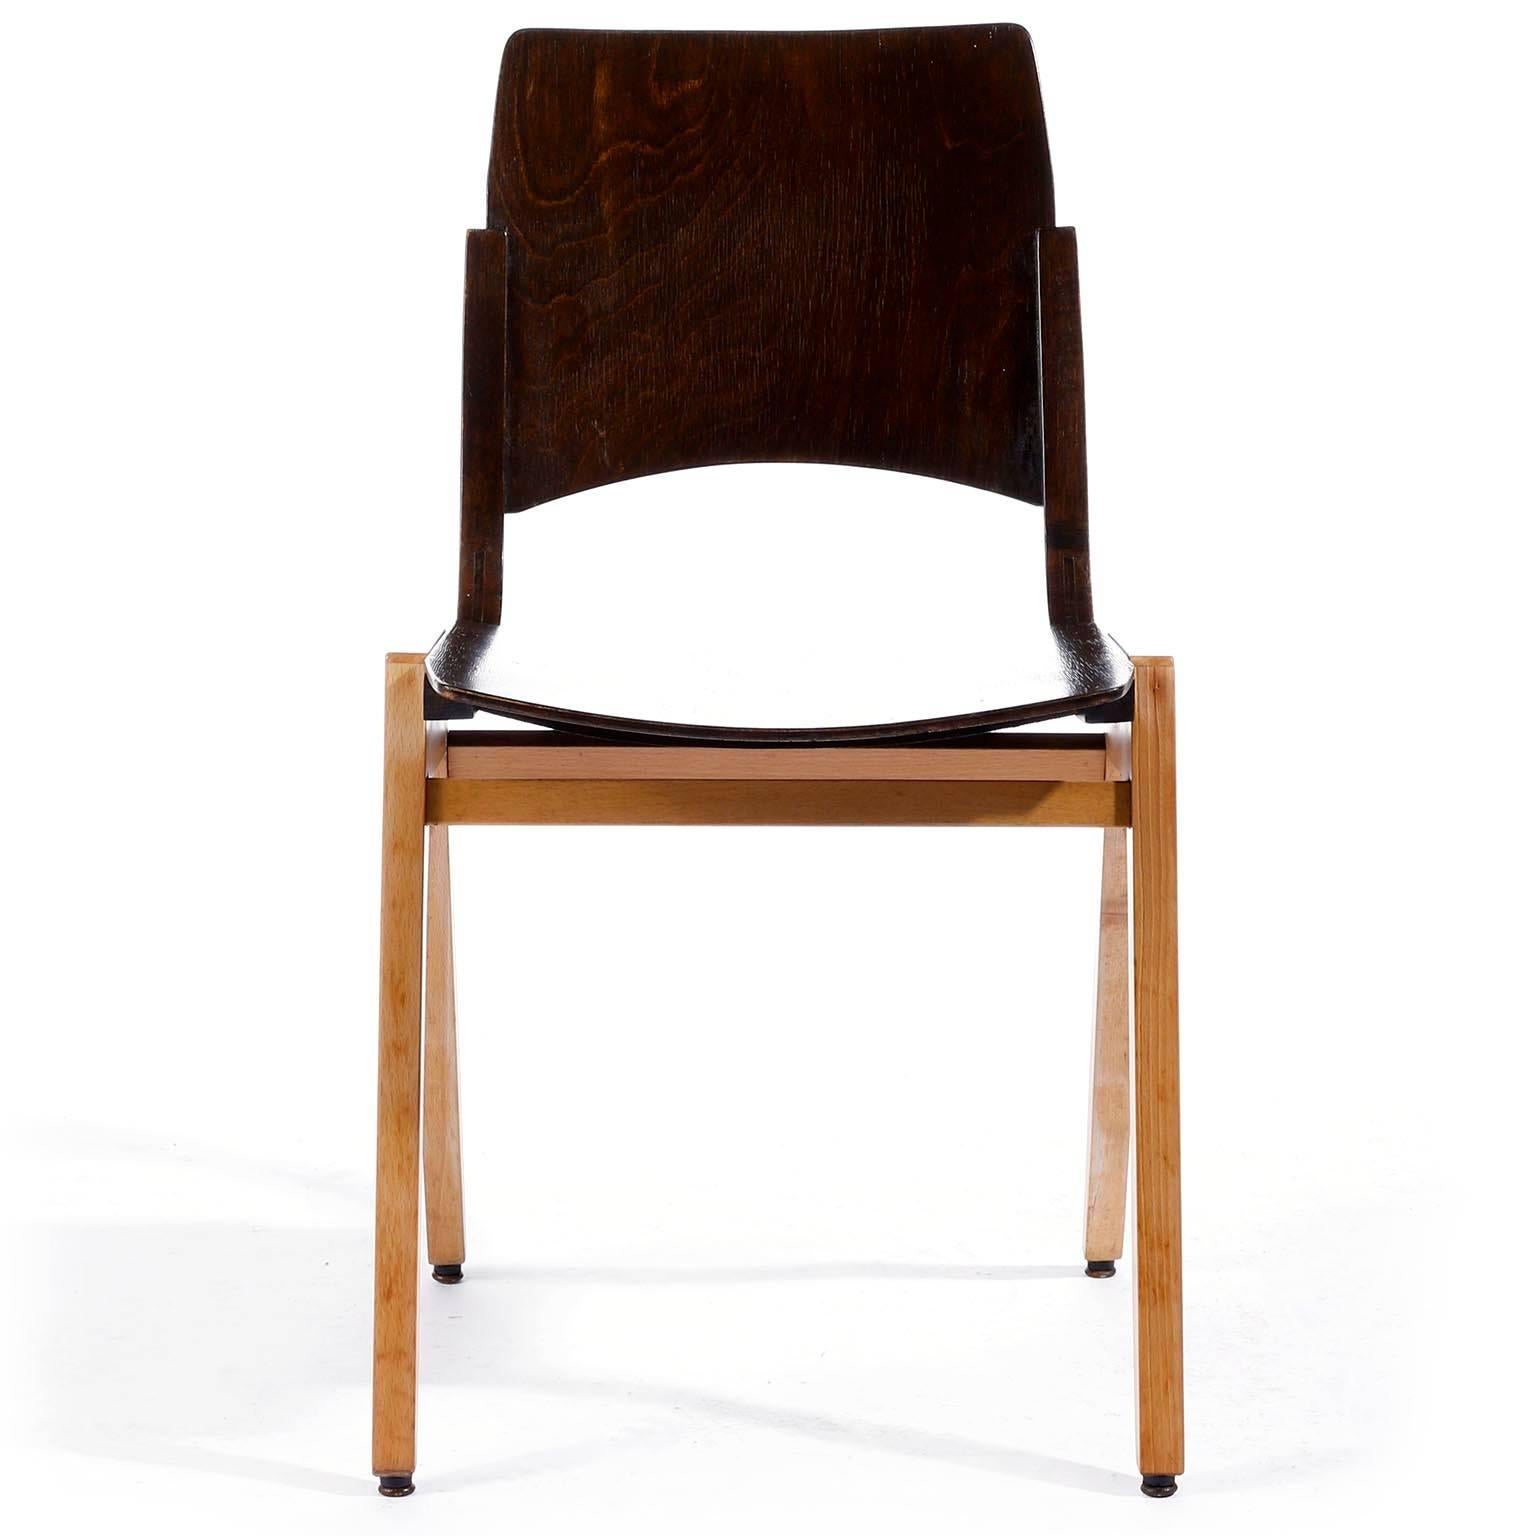 Austrian Roland Rainer, Set of Eight Stacking Chairs P7, Bicolored Beech, Austria, 1952 For Sale